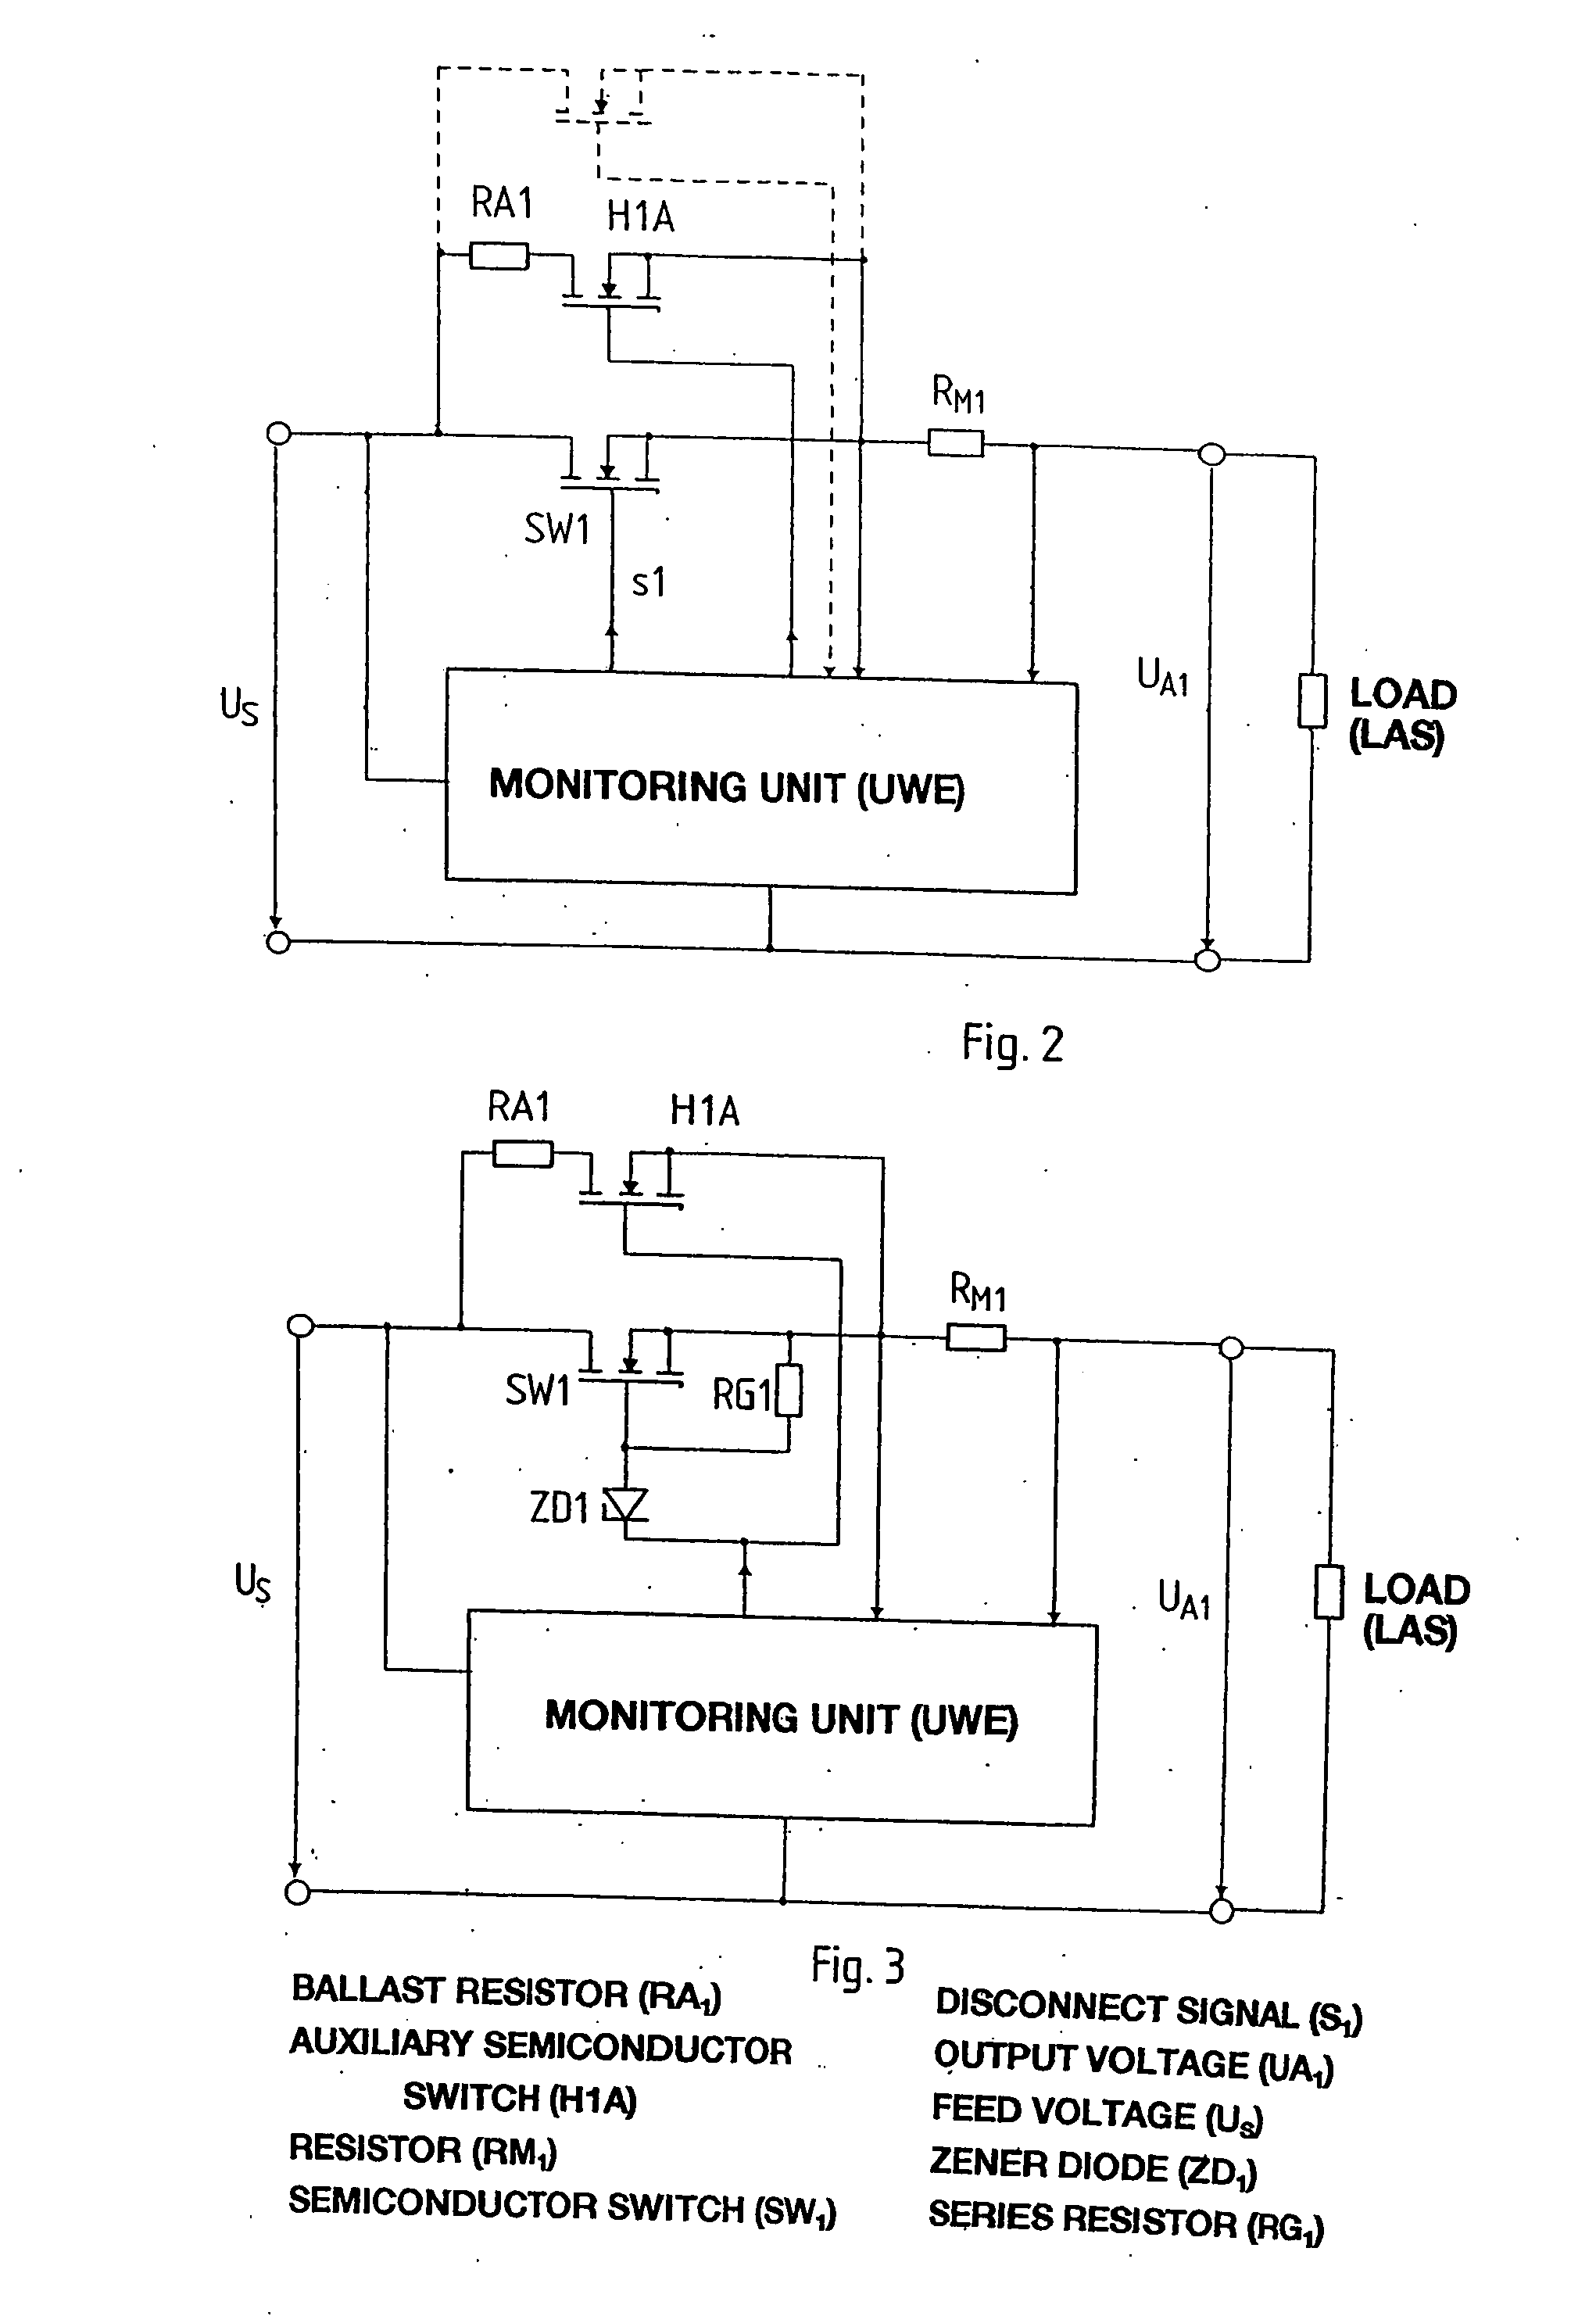 Power supply with disconnect fuse